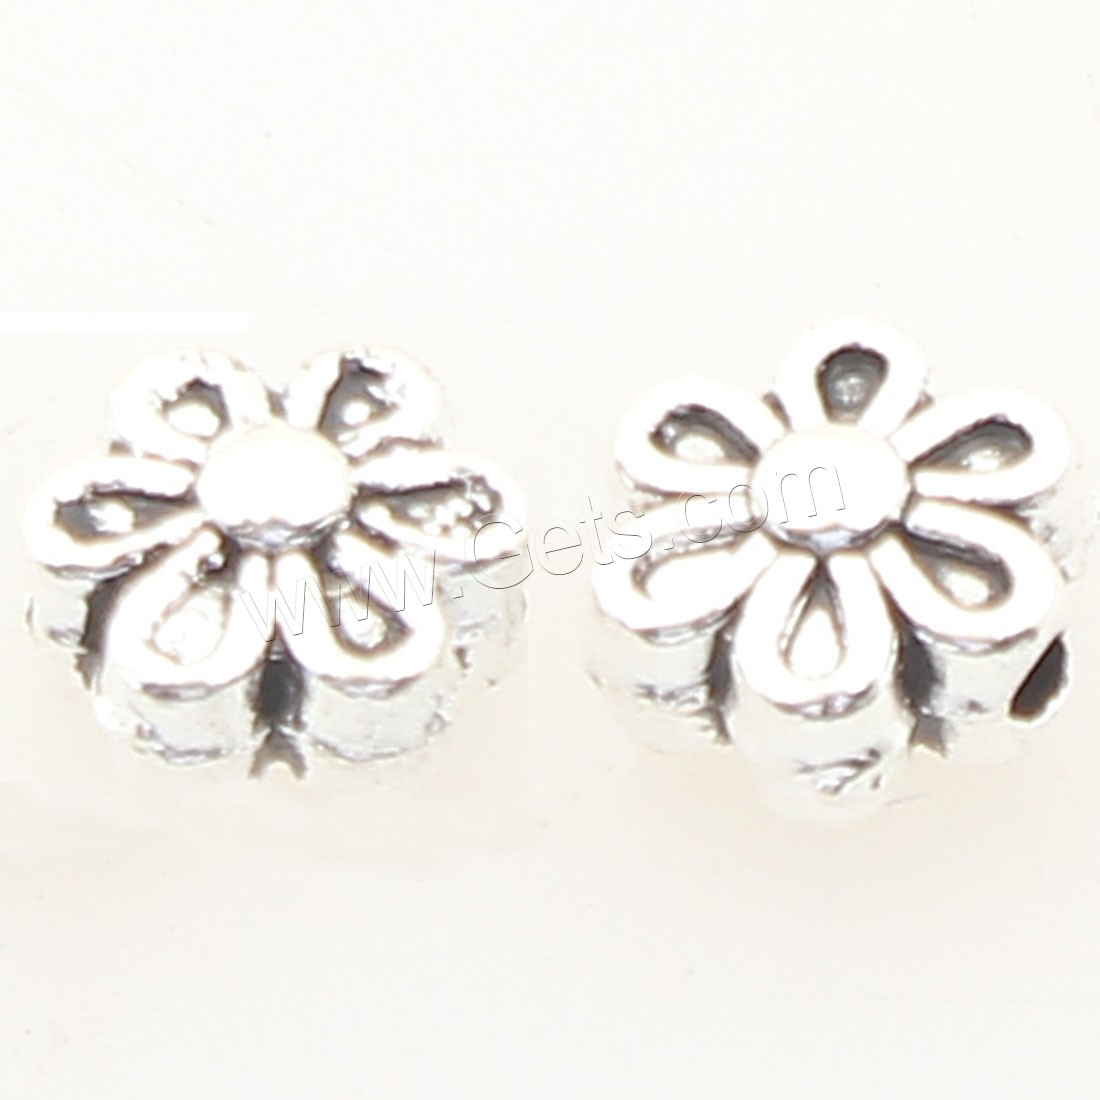 Zinc Alloy Flower Beads, antique silver color plated, 6x6mm, Hole:Approx 1mm, Approx 1190PCs/Bag, Sold By Bag